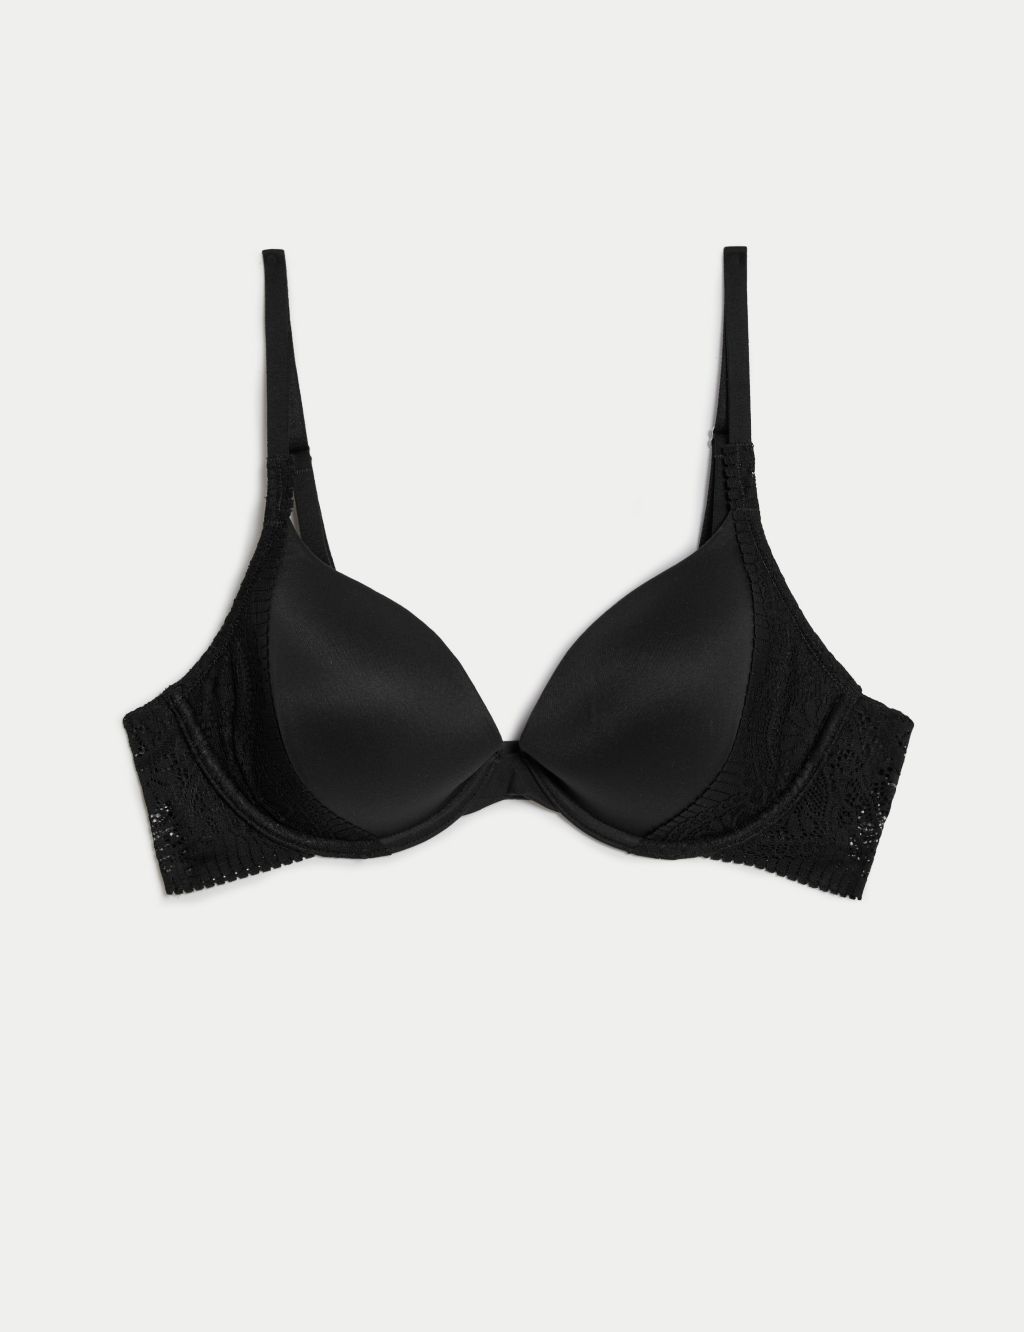 Buy Lady Lyka Padded Non Wired Full Coverage T-Shirt Bra - Black at Rs.419  online